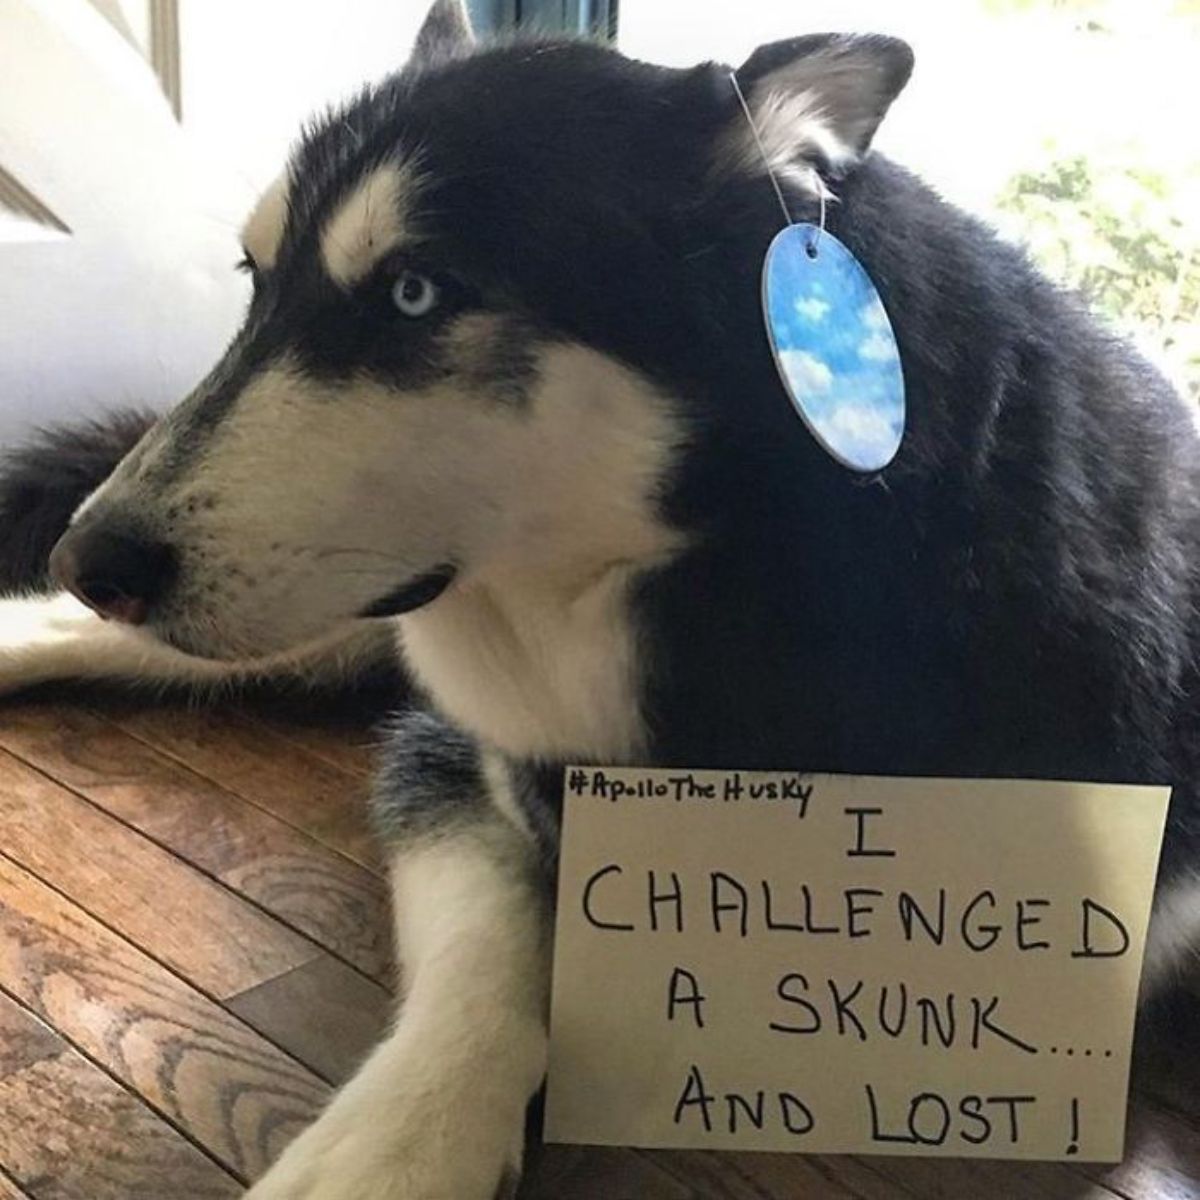 black and white husky laying on the floor with a note saying "I challenged a skunk... and lost!"